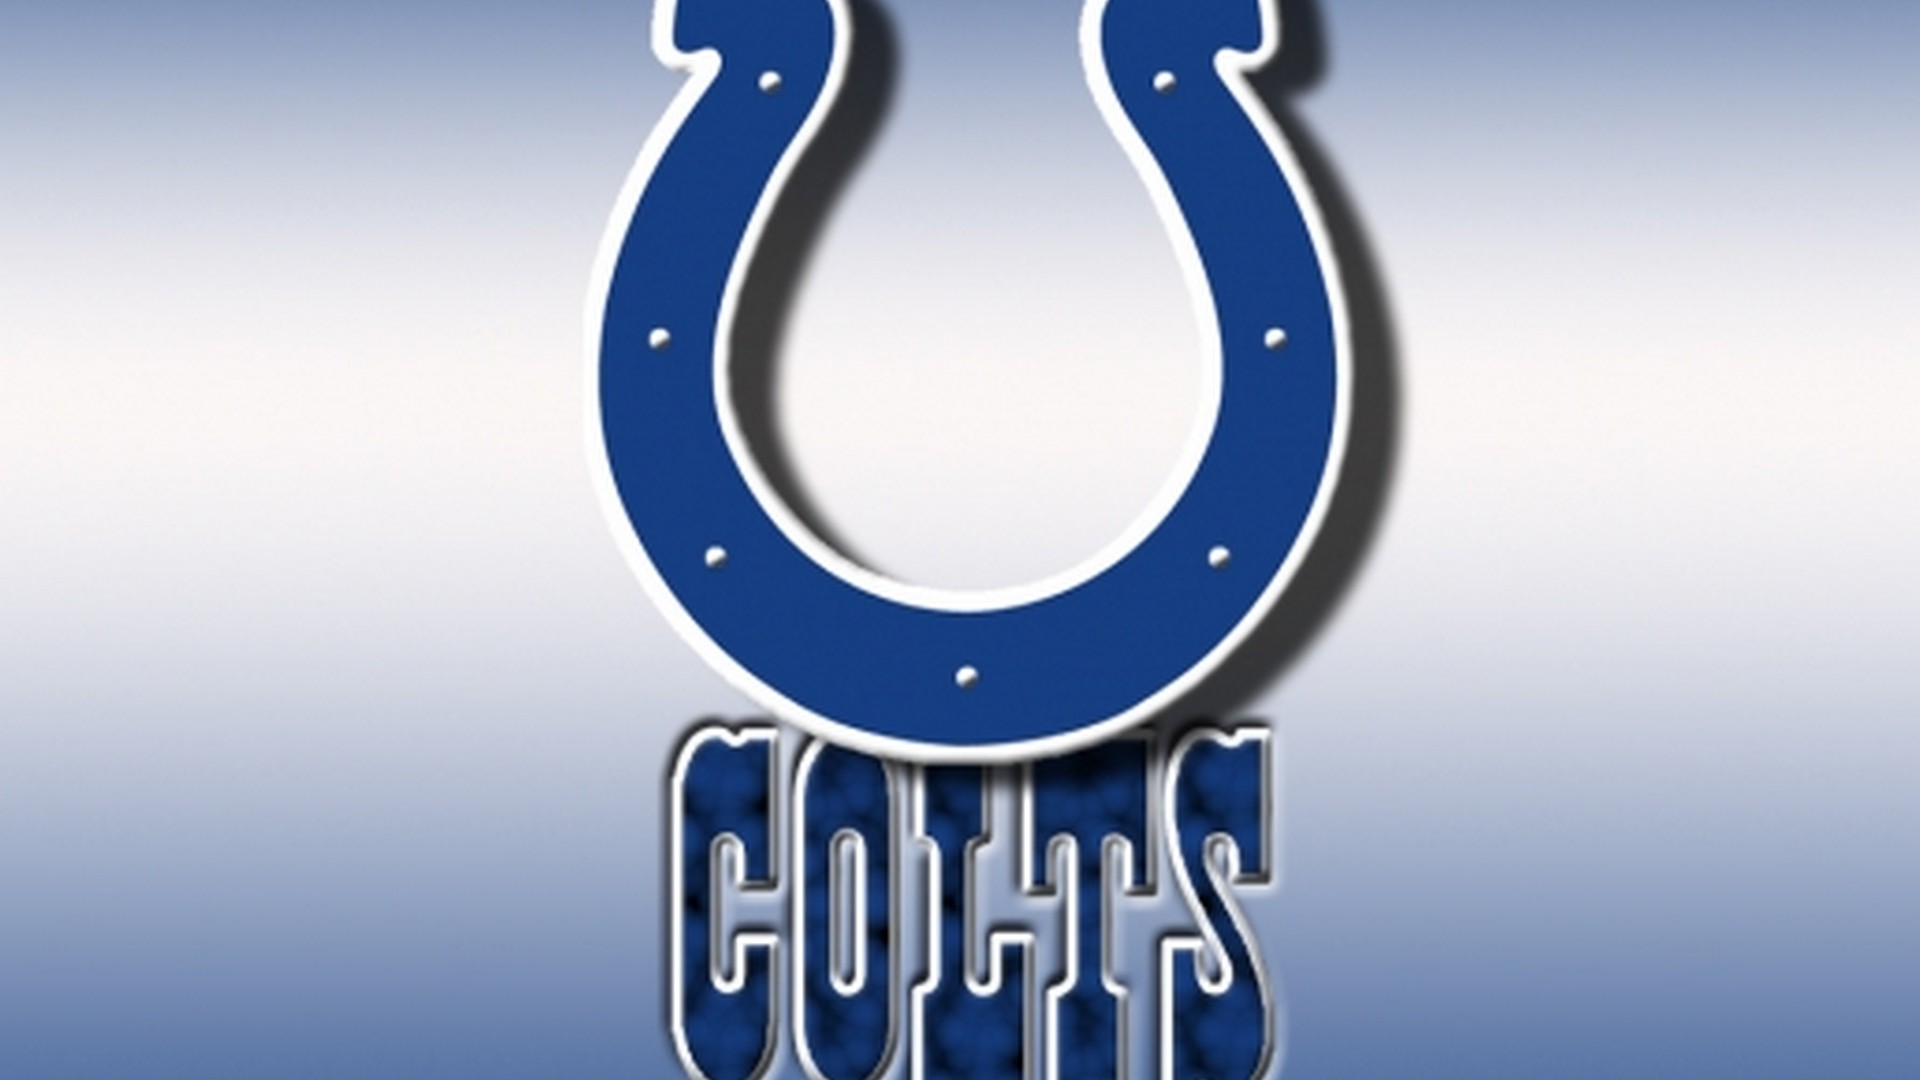 Windows Wallpaper Indianapolis Colts NFL with resolution 1920x1080 pixel. You can make this wallpaper for your Mac or Windows Desktop Background, iPhone, Android or Tablet and another Smartphone device